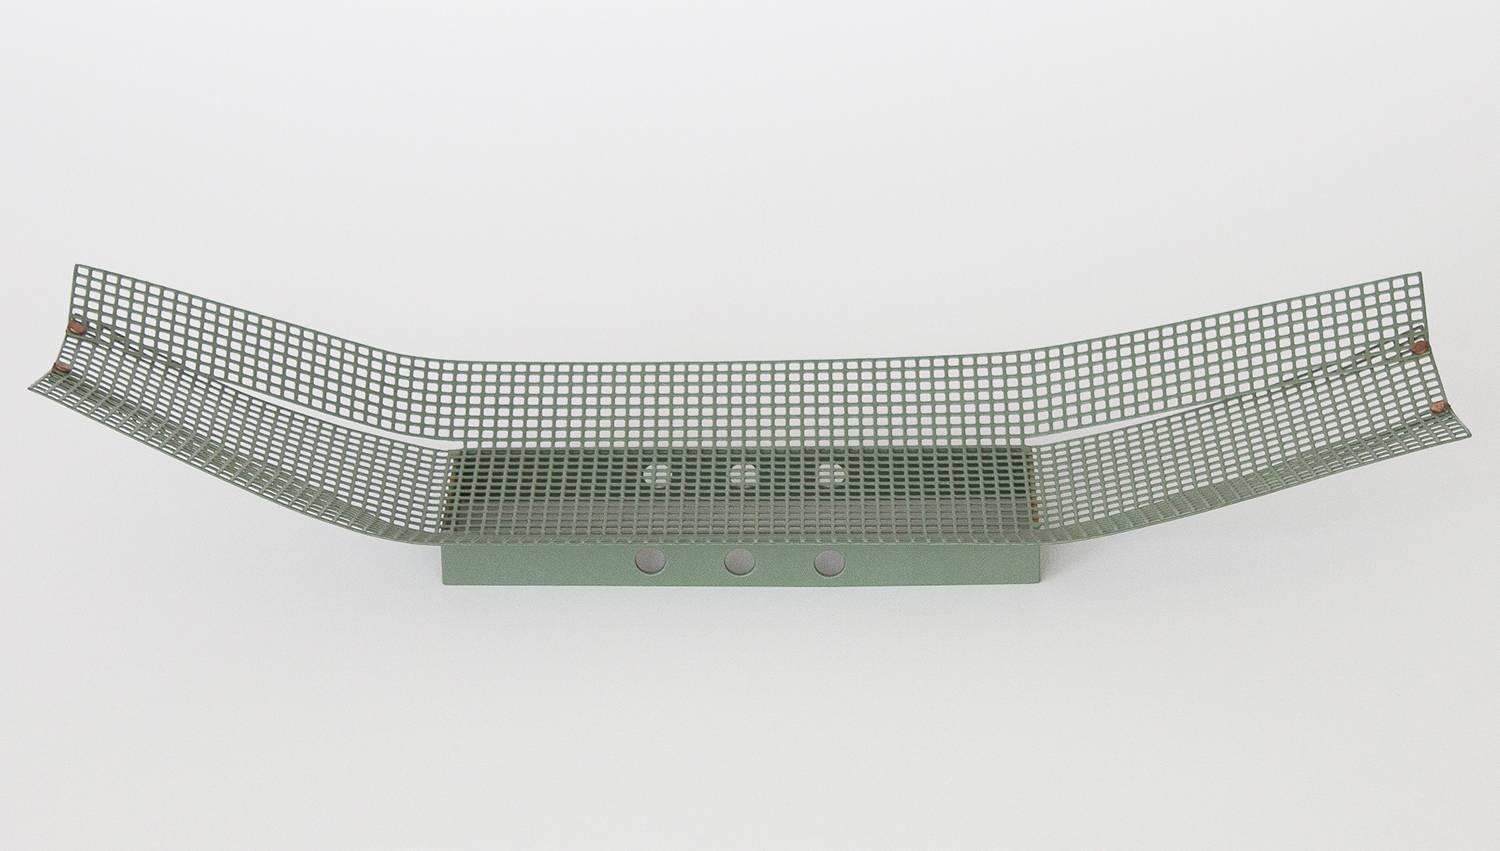 Unique modernist muted green enameled perforated metal tray or bowl. Grid perforations. Industrial postmodern design. Overlapping folded metal ends create a boat shaped design and are held in place by copper rivets. Rectangular metal base with